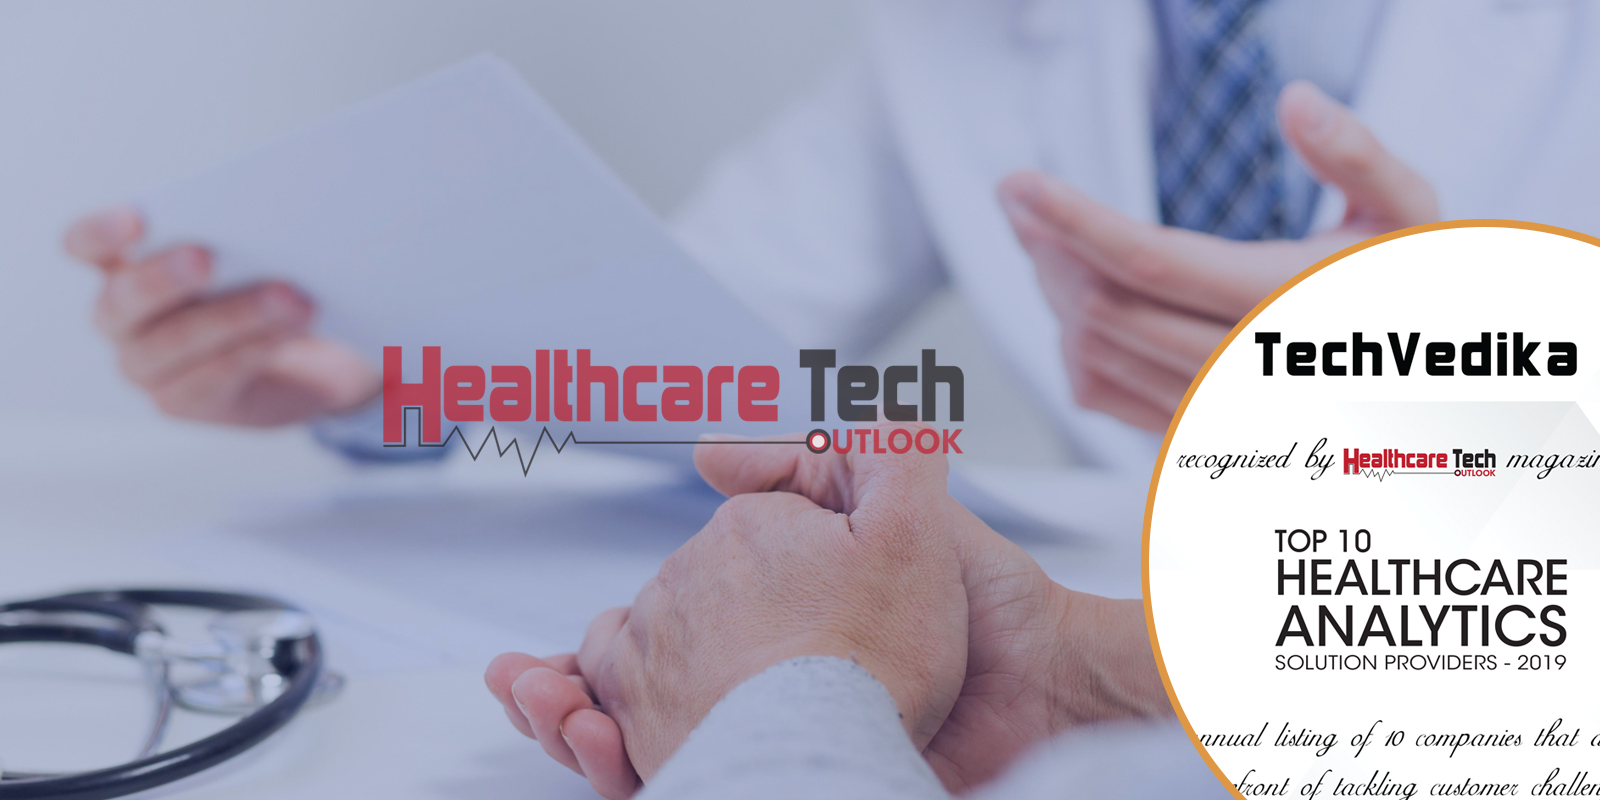 Healthcare Tech Outlook recognizes Tech Vedika as Top 10 Healthcare Analytics Solution Providers for 2019